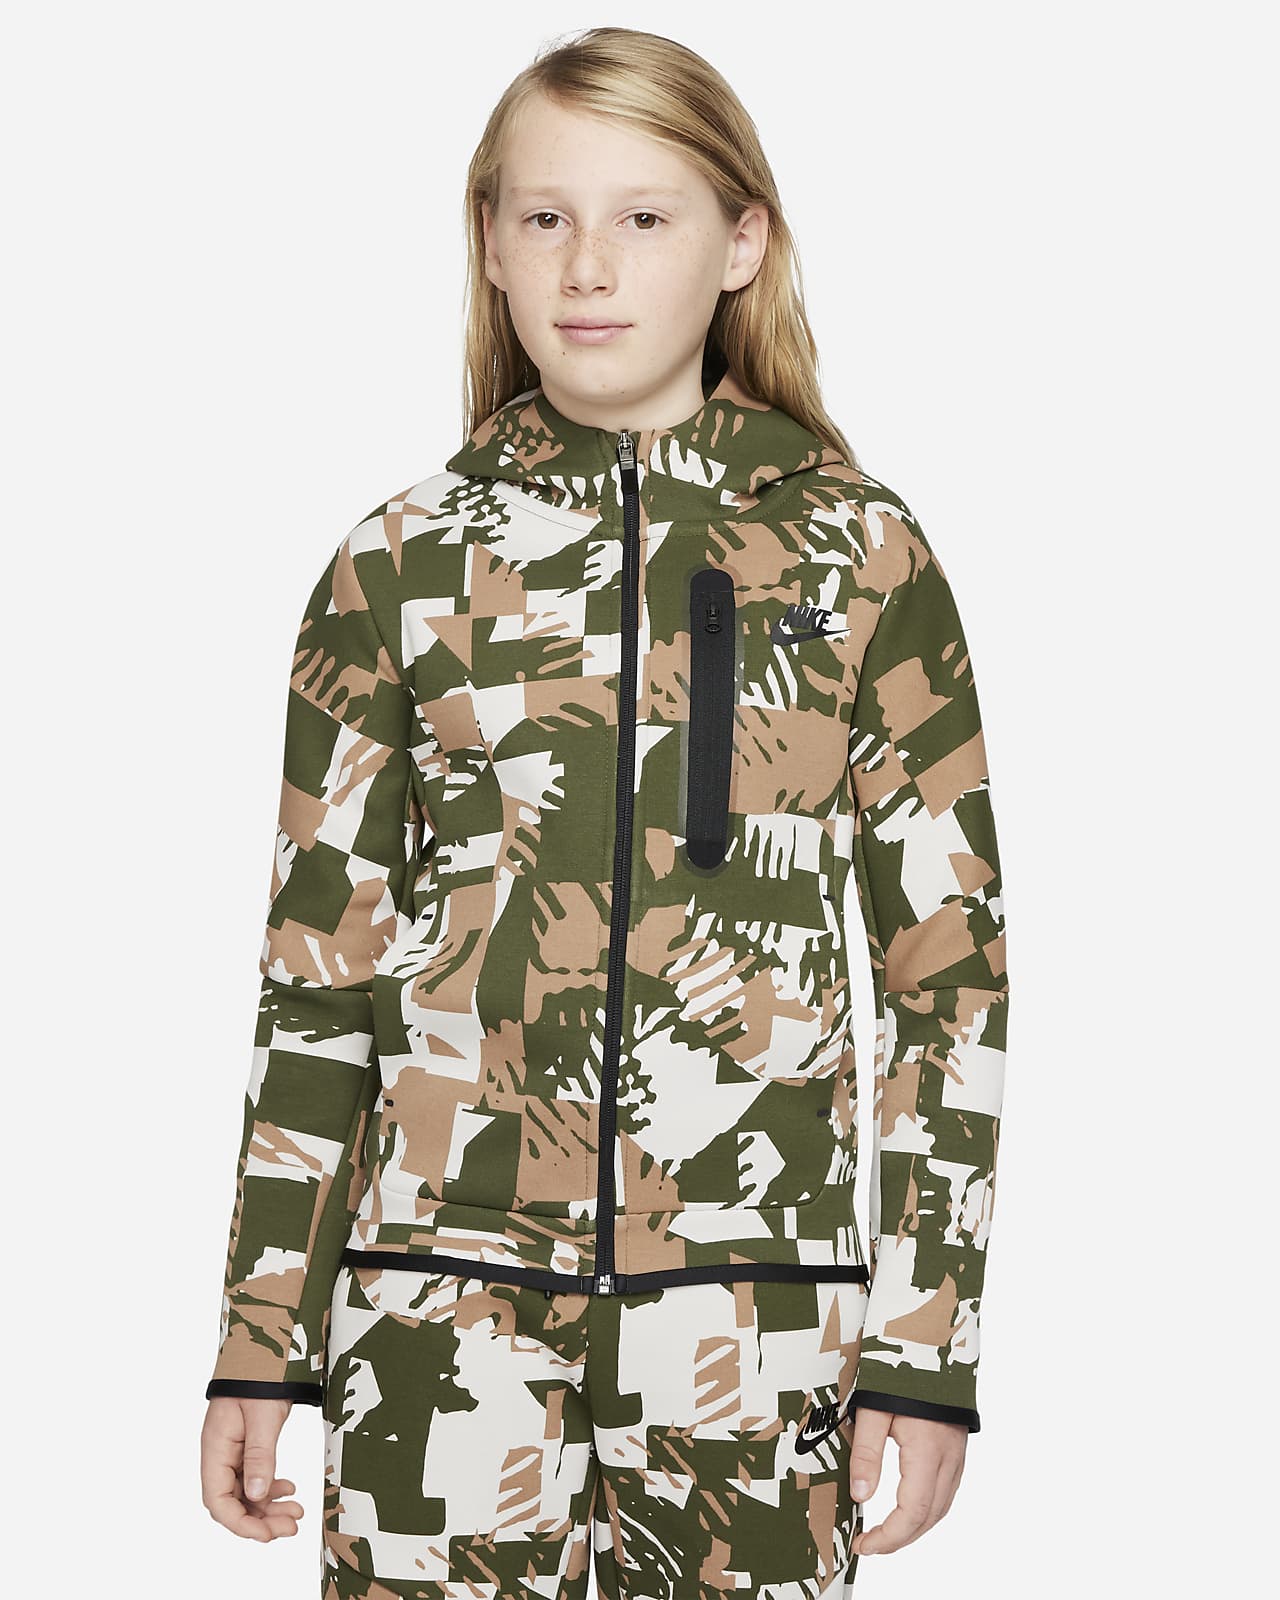 Kids Girls Boys Hooded Onesie Camouflage All In One Army Fleece Tracksuit Sizes 